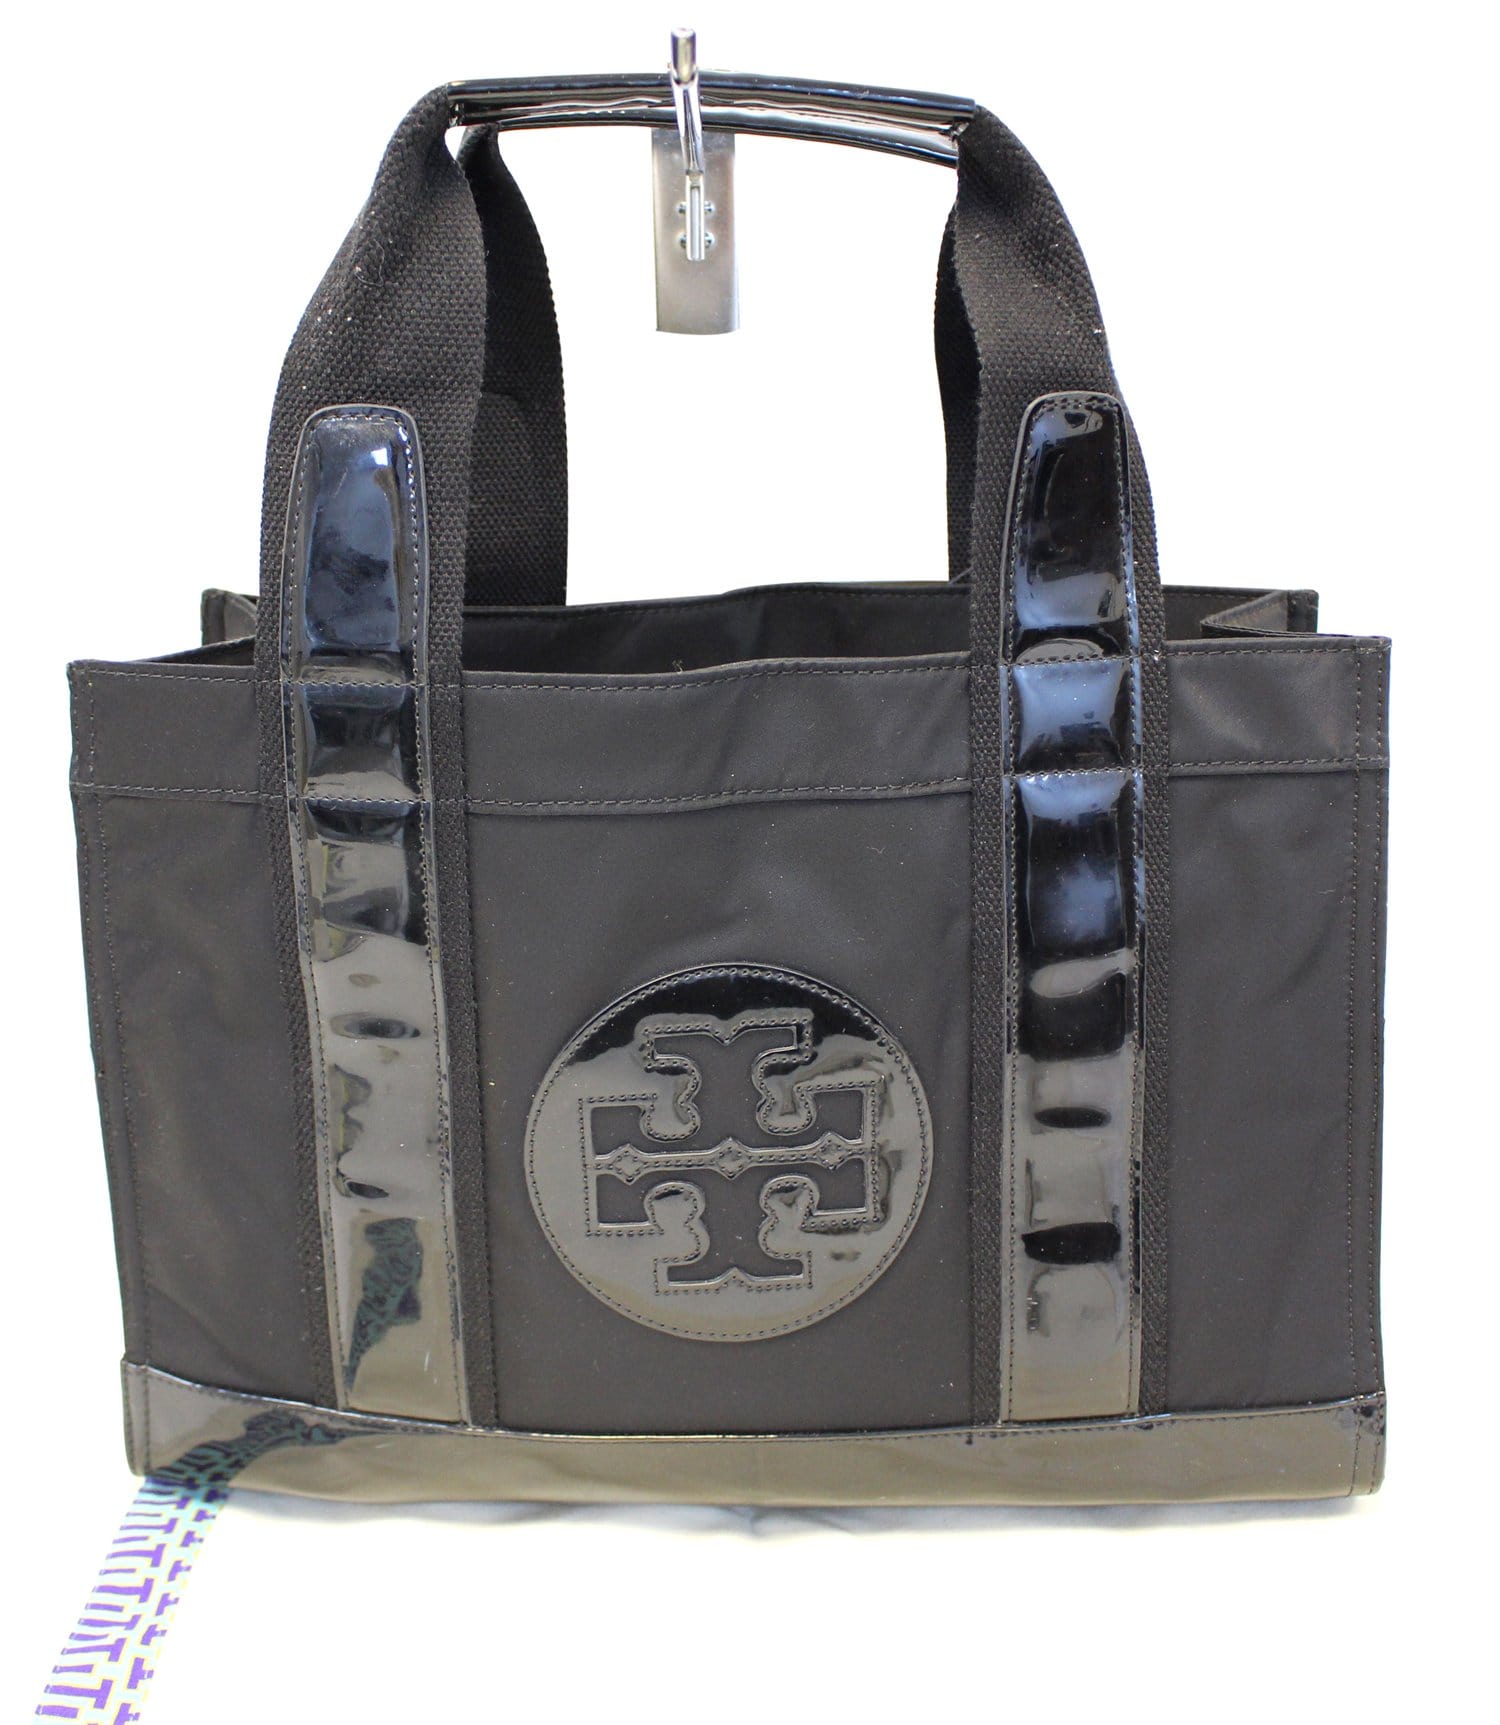 Tory+Burch+88366+Nylon+Tote+Bag%2C+Large+-+Black for sale online